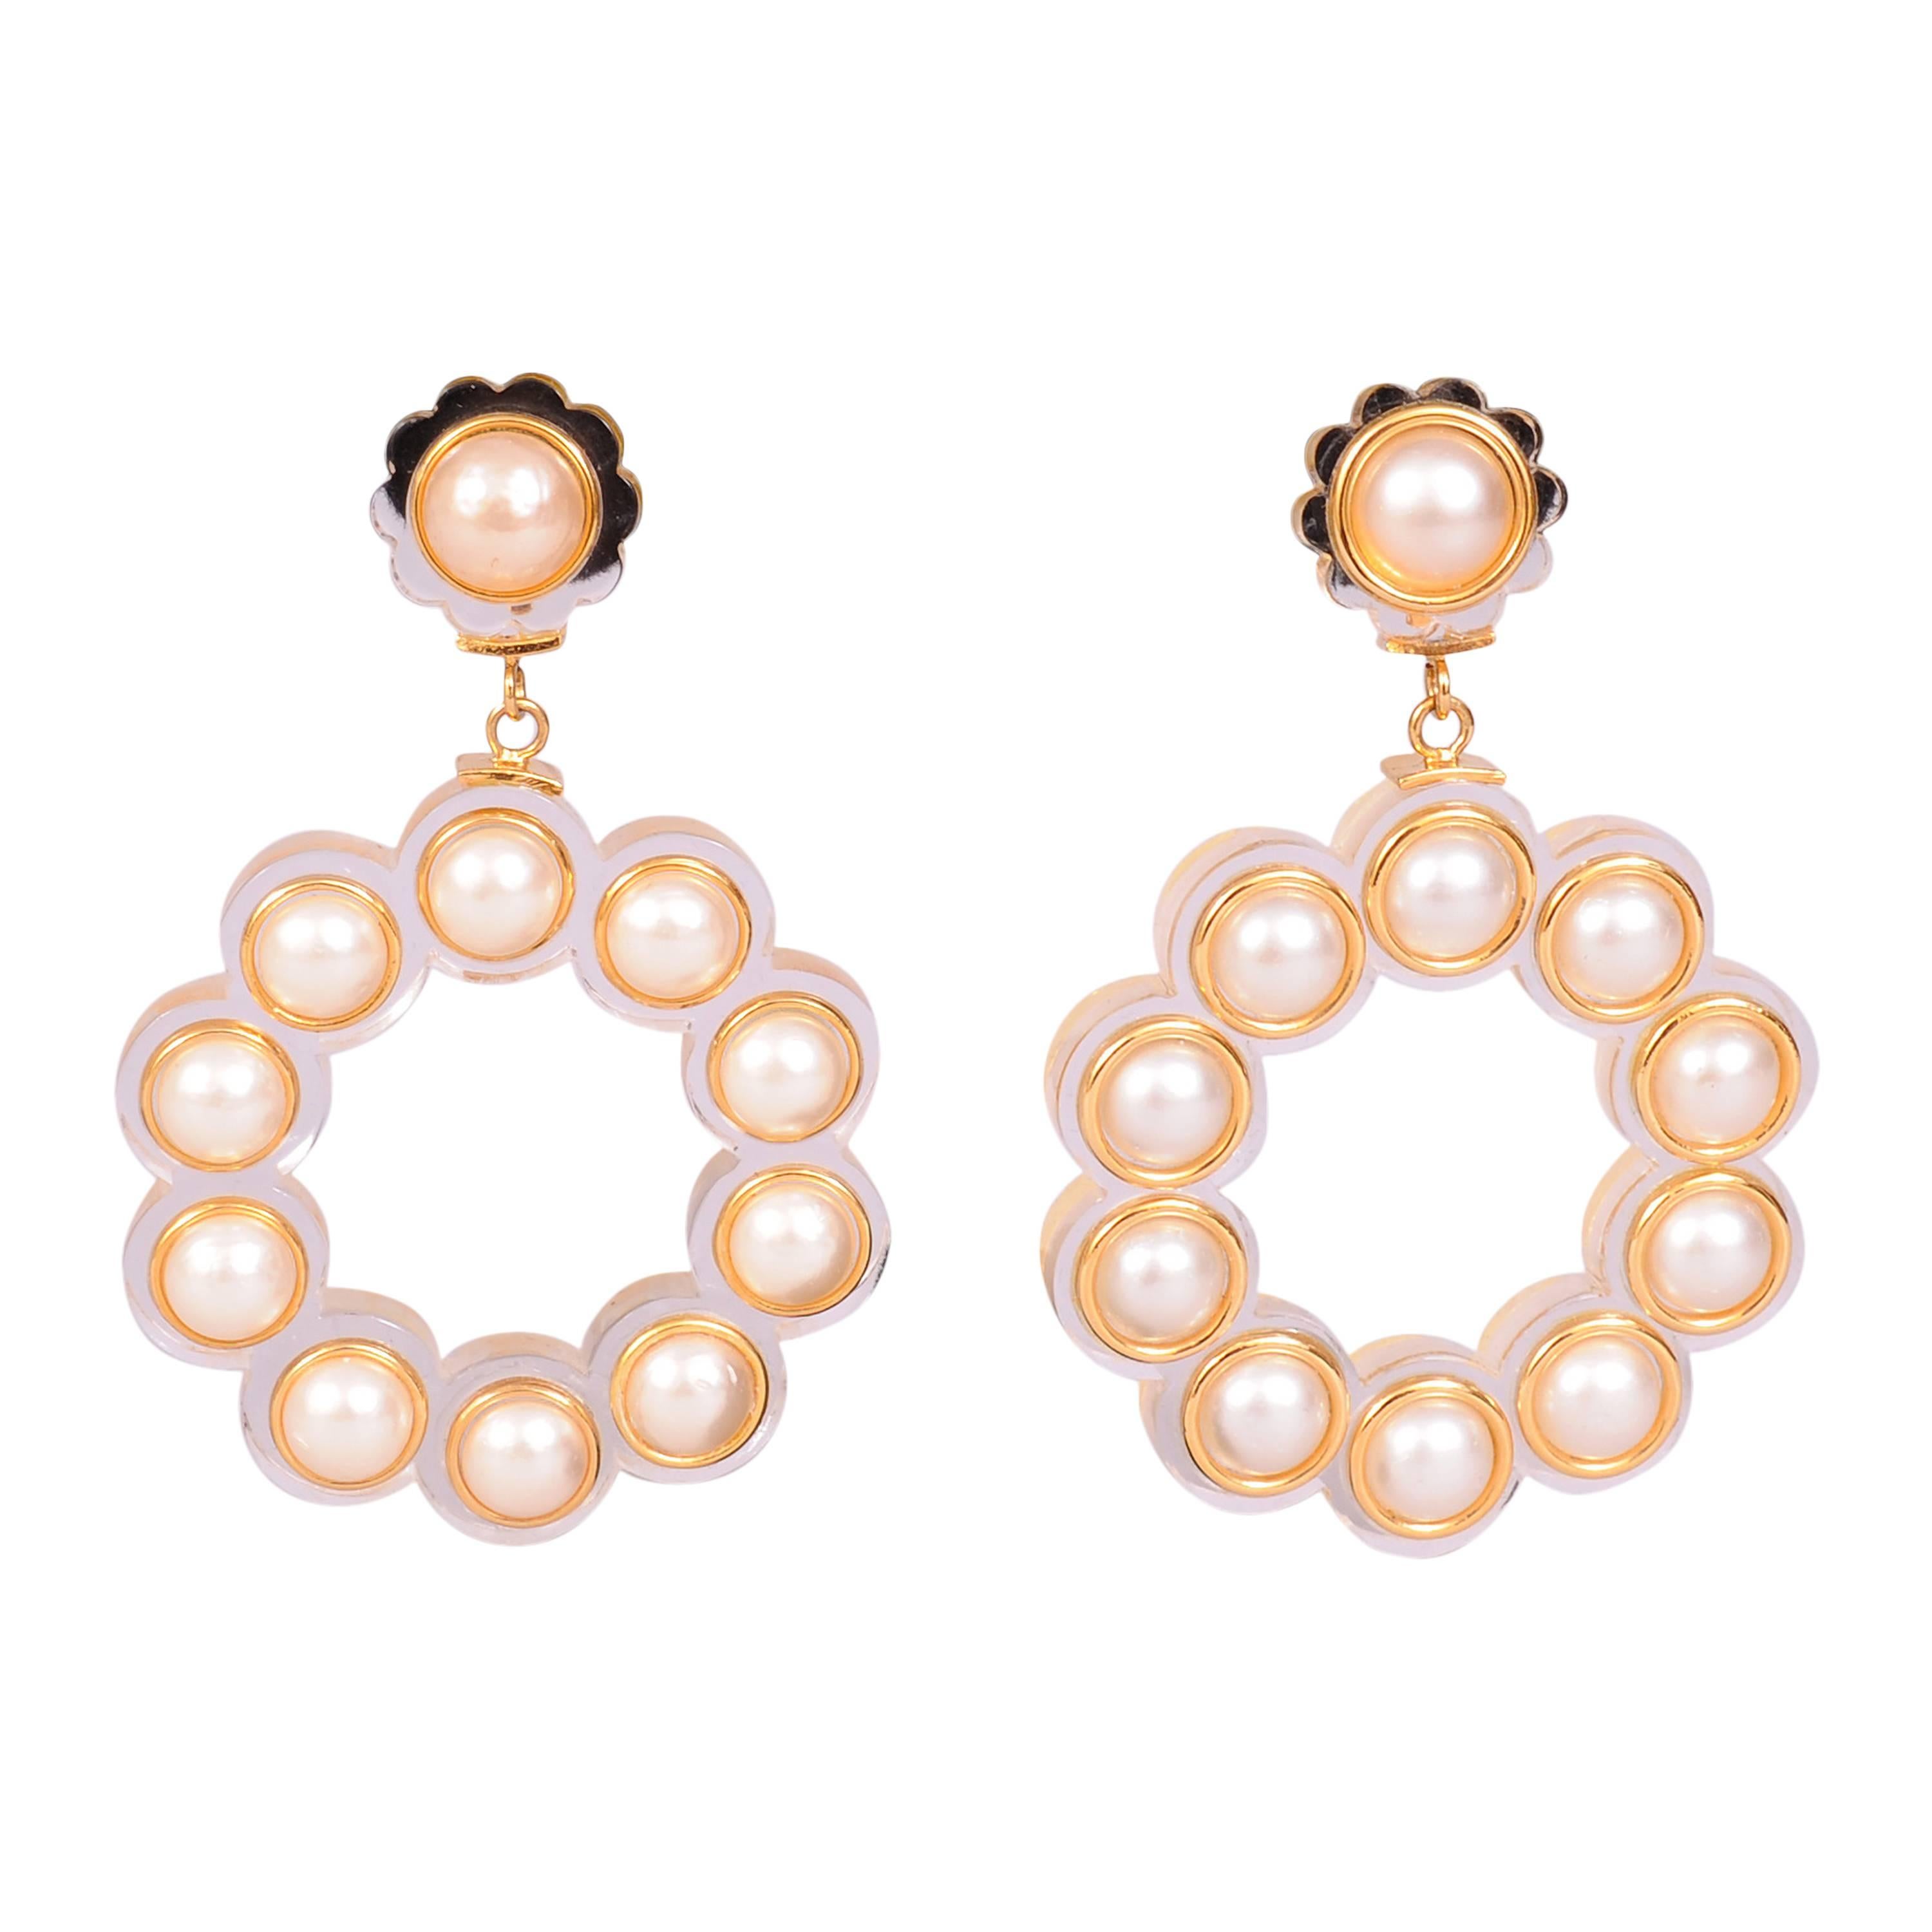 Chanel Runway Worn Lucite and Pearl Earrings